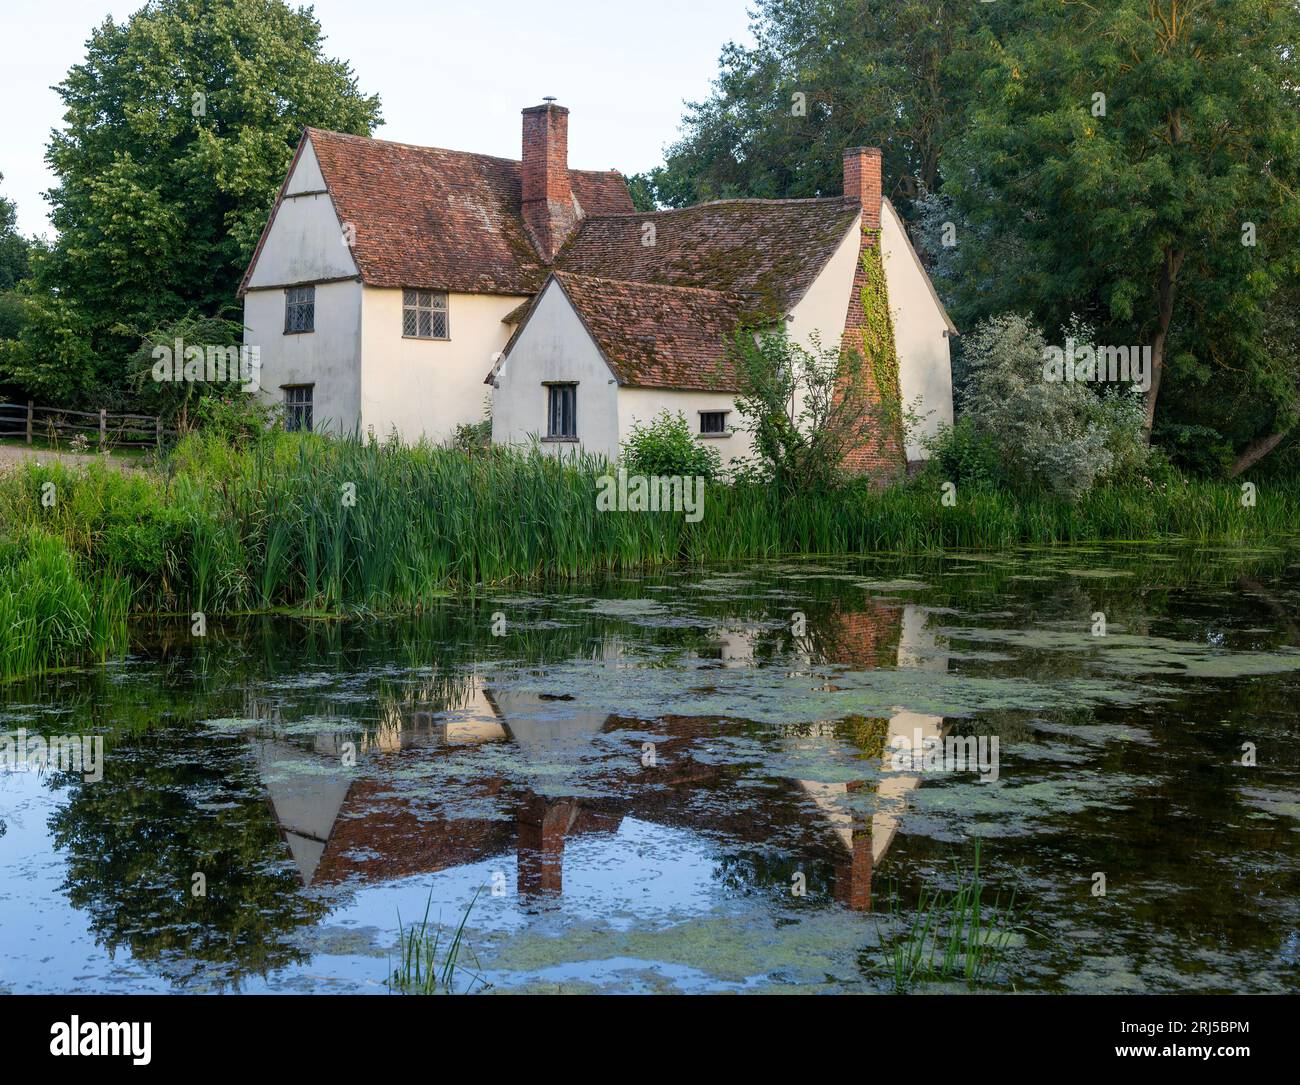 Maison de Willy Lott, River Stour, Flatford Mill, East Bergholt, Suffolk, Angleterre, Royaume-Uni Banque D'Images